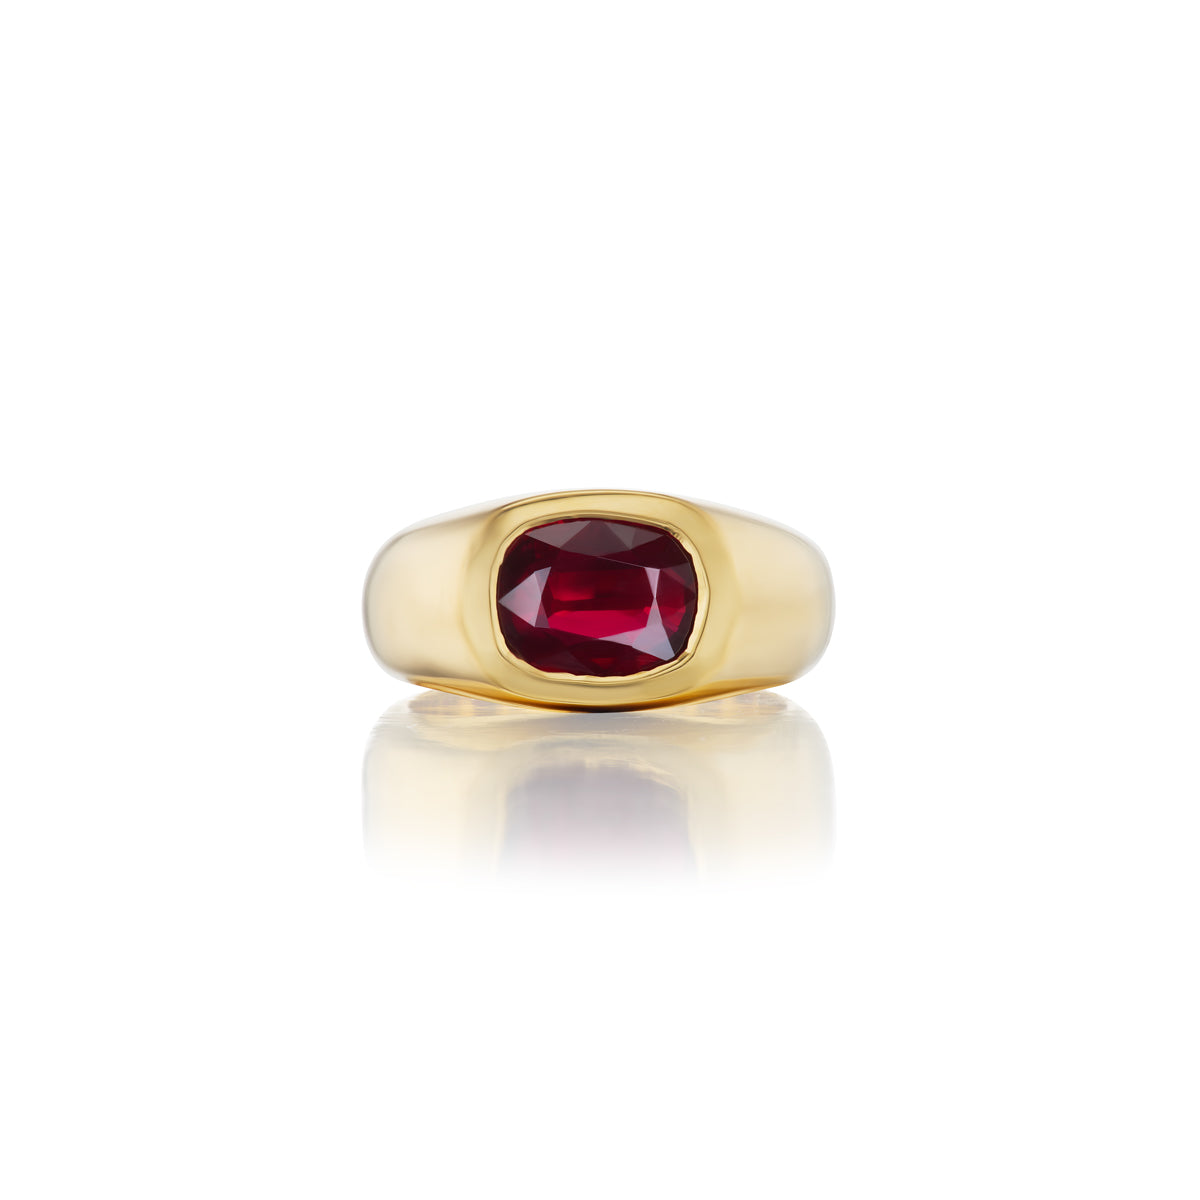 THE PINKY RING // 1.94ct RUBY